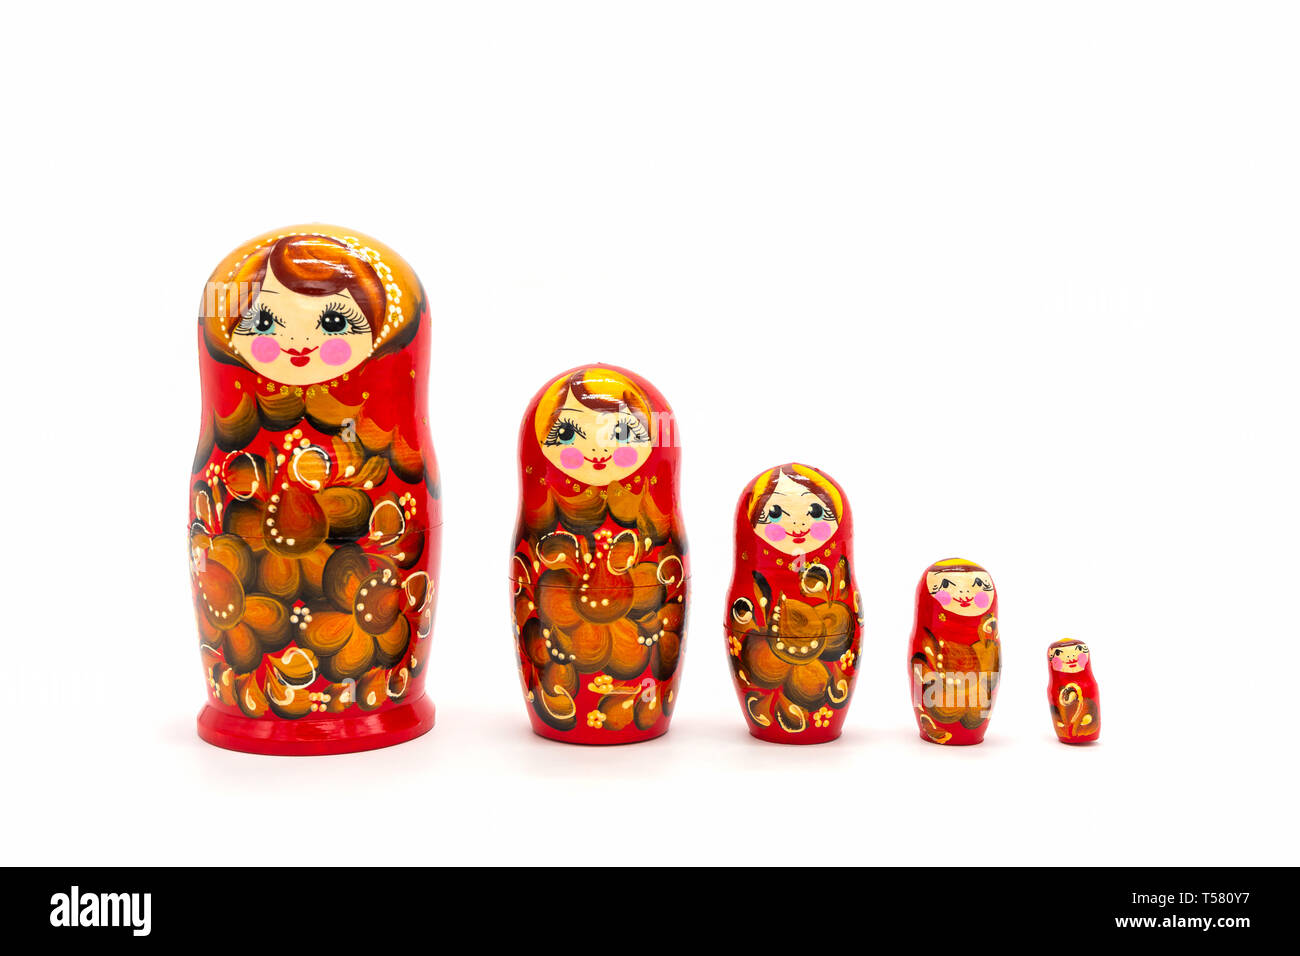 russian wooden stacking dolls